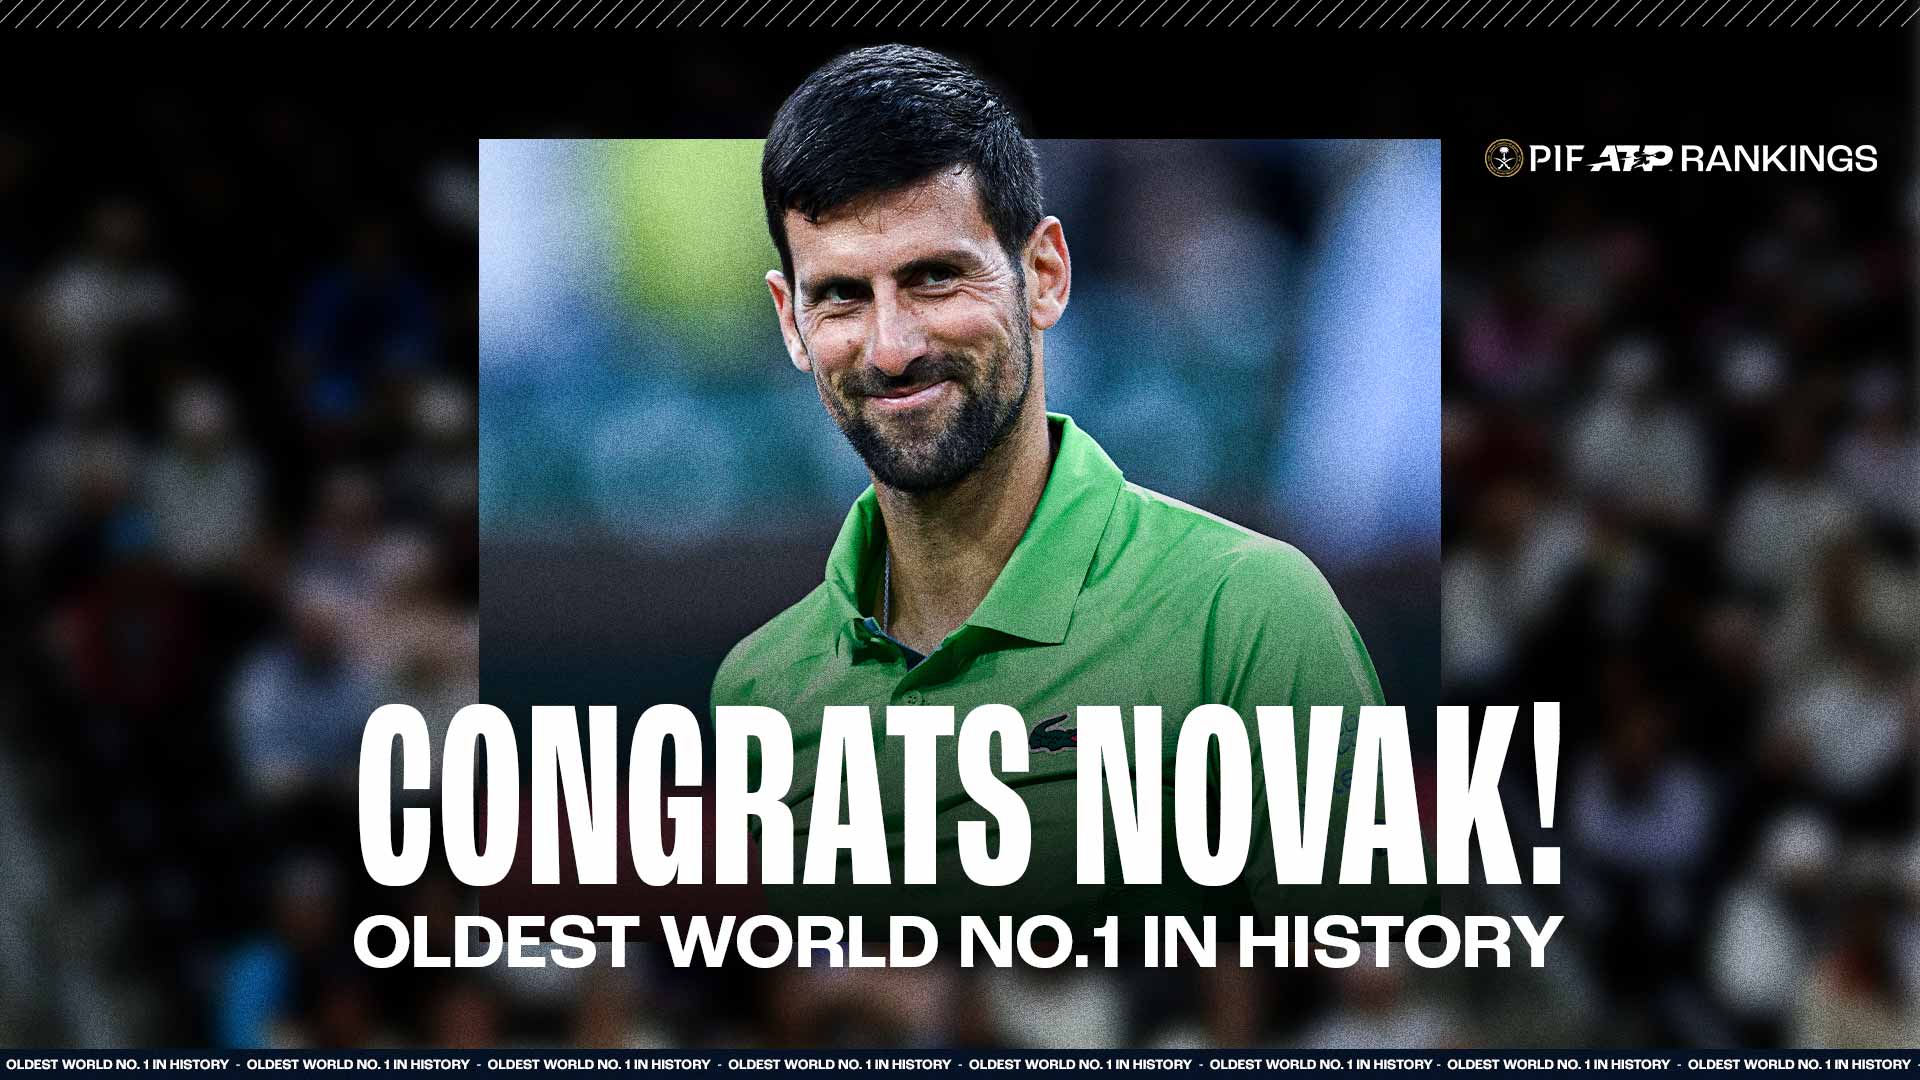 Novak Djokovic is the oldest no. 1 player in the ATP rankings - sportzpoint.com